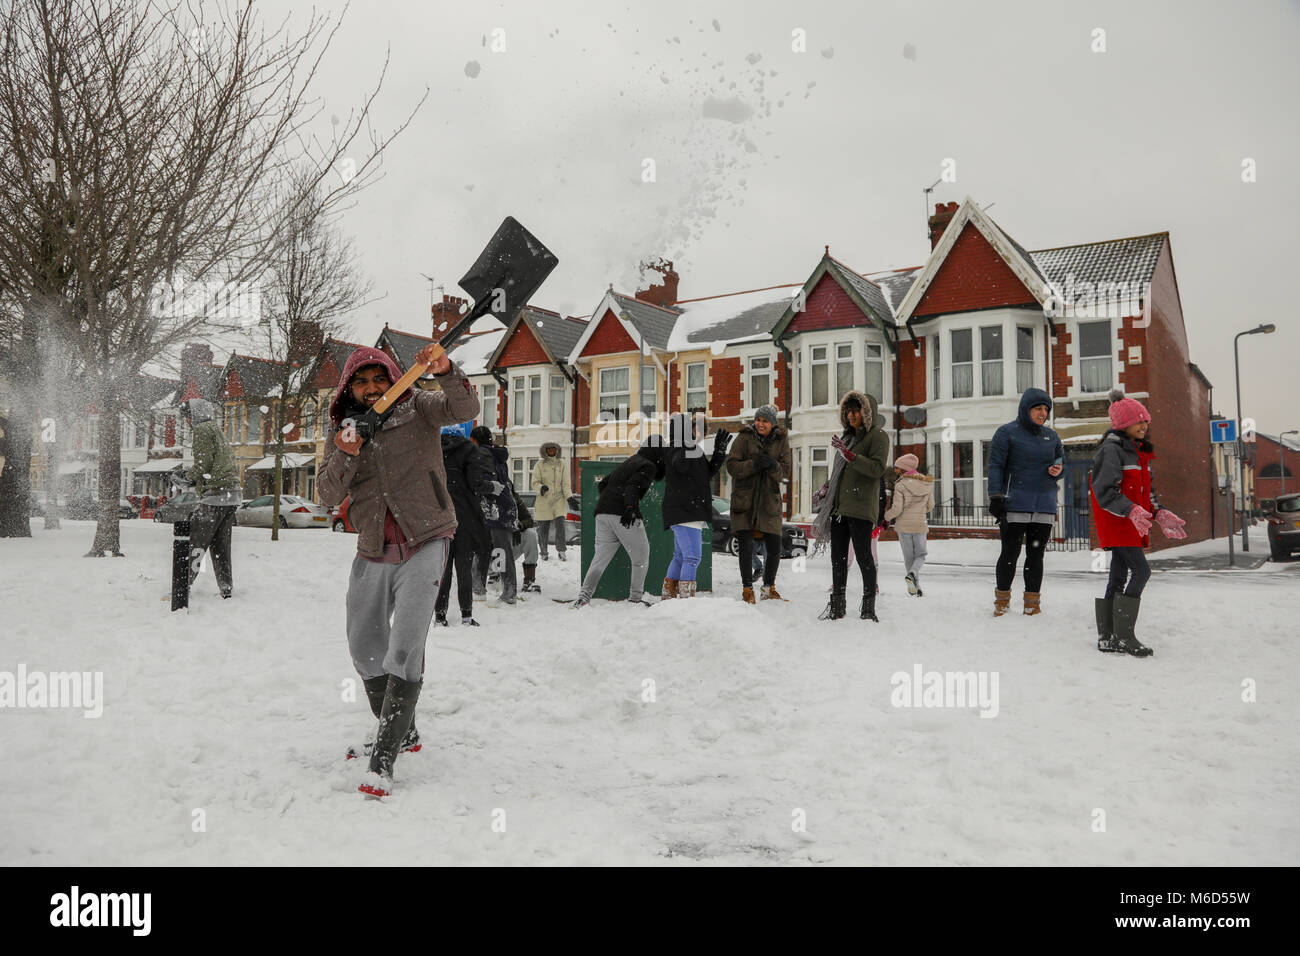 Cardiff, Wales, UK. 2nd Mar, 2018. Cardiff residents enjoy the snow outside the Shri Swaminarayan Mandir, Hindu temple in Grangetown, Cardiff, Following a night of heavy snow and blizzard conditions. Cardiff has been given a red weather alert due to Storm Emma, known also as the Beast from the East. Further snow and bad weather is forecasted throughout the night. Credit: Haydn Denman/Alamy Live News Stock Photo